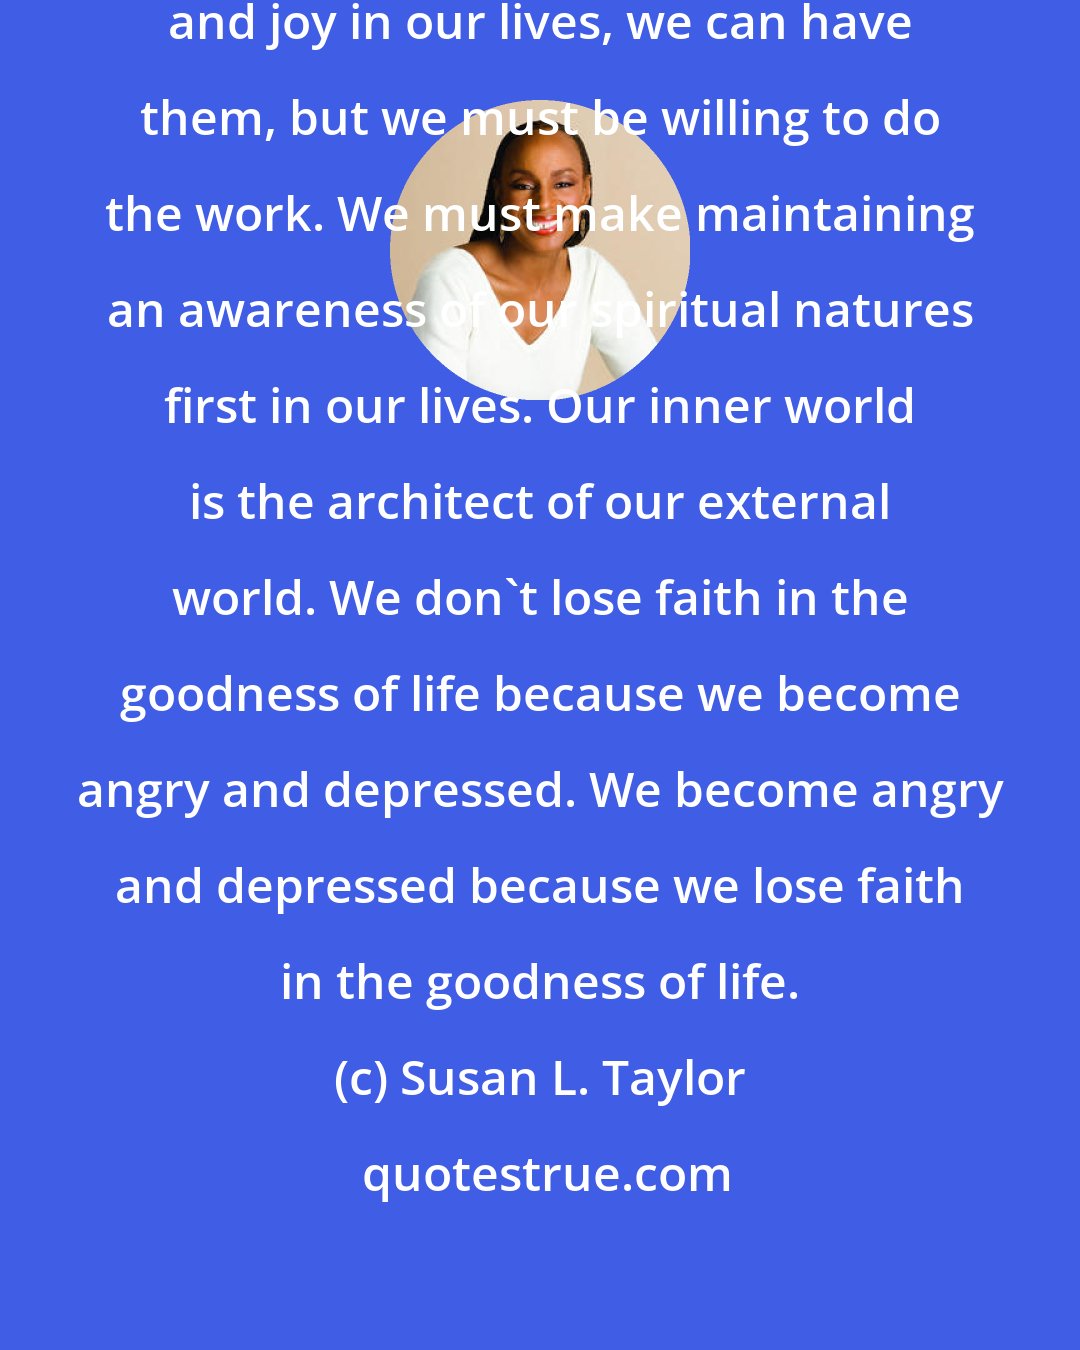 Susan L. Taylor: If we want sincere harmony, peace and joy in our lives, we can have them, but we must be willing to do the work. We must make maintaining an awareness of our spiritual natures first in our lives. Our inner world is the architect of our external world. We don't lose faith in the goodness of life because we become angry and depressed. We become angry and depressed because we lose faith in the goodness of life.